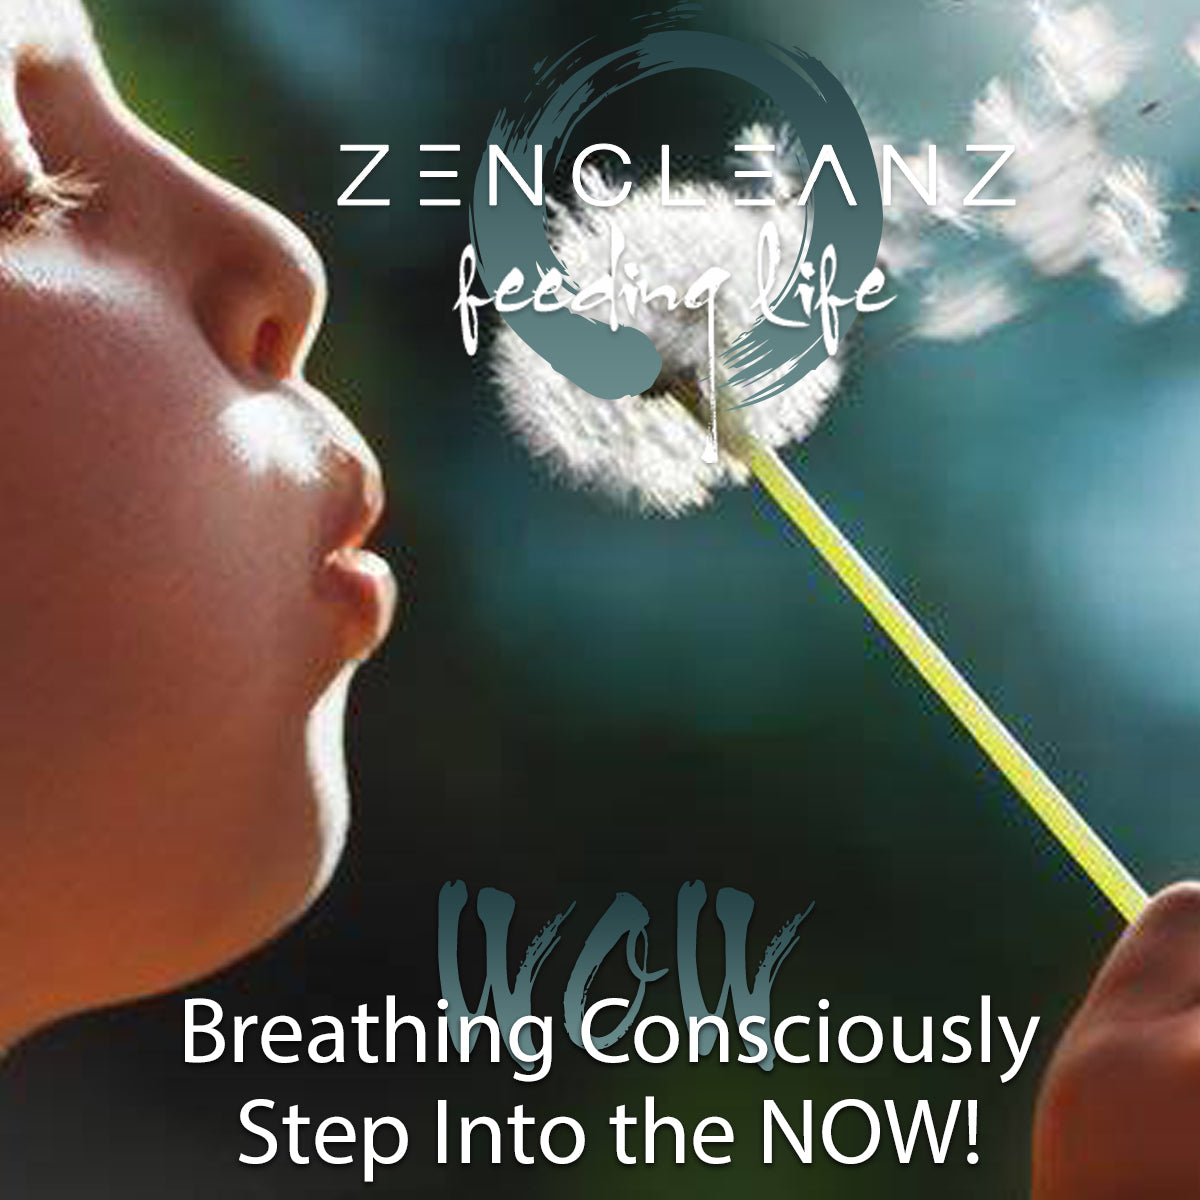 Breathing Consciously Step Into the NOW!